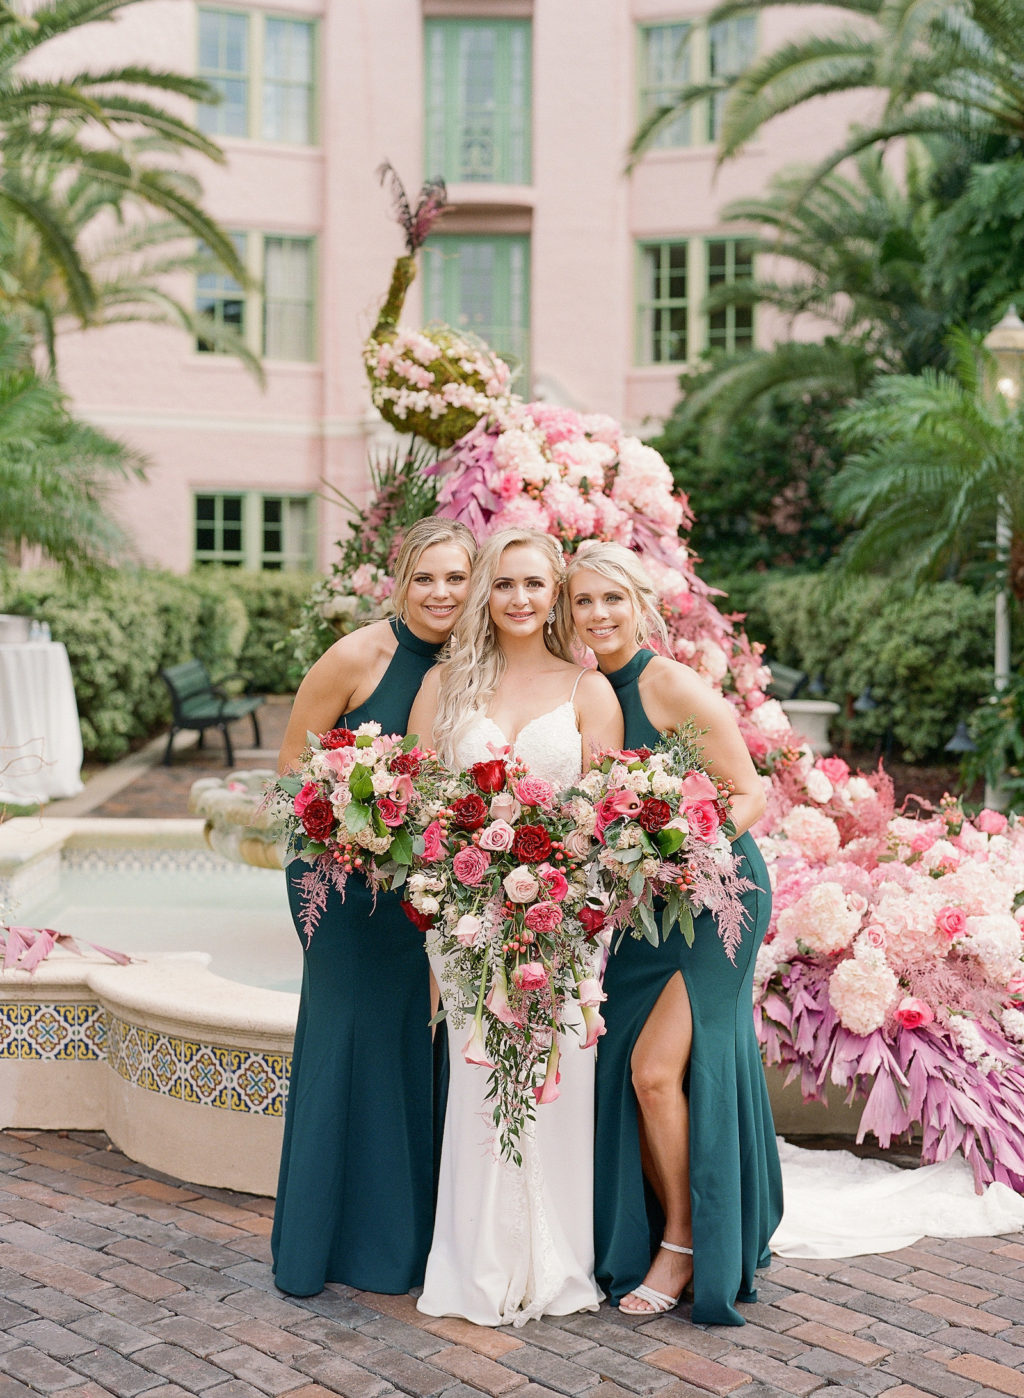 Elegant Bride with Bridesmaids in Emerald Green Dresses Holding Red, Pink and White Roses with Greenery Floral Bouquets Standing in Front of Courtyard Water Fountain with Floral Peacock Statue with Pink, White and Purple Lush Floral Tail | St. Pete Wedding Venue The Vinoy Renaissance | Tampa Bay Wedding Hair and Makeup Femme Akoi Beauty Studio